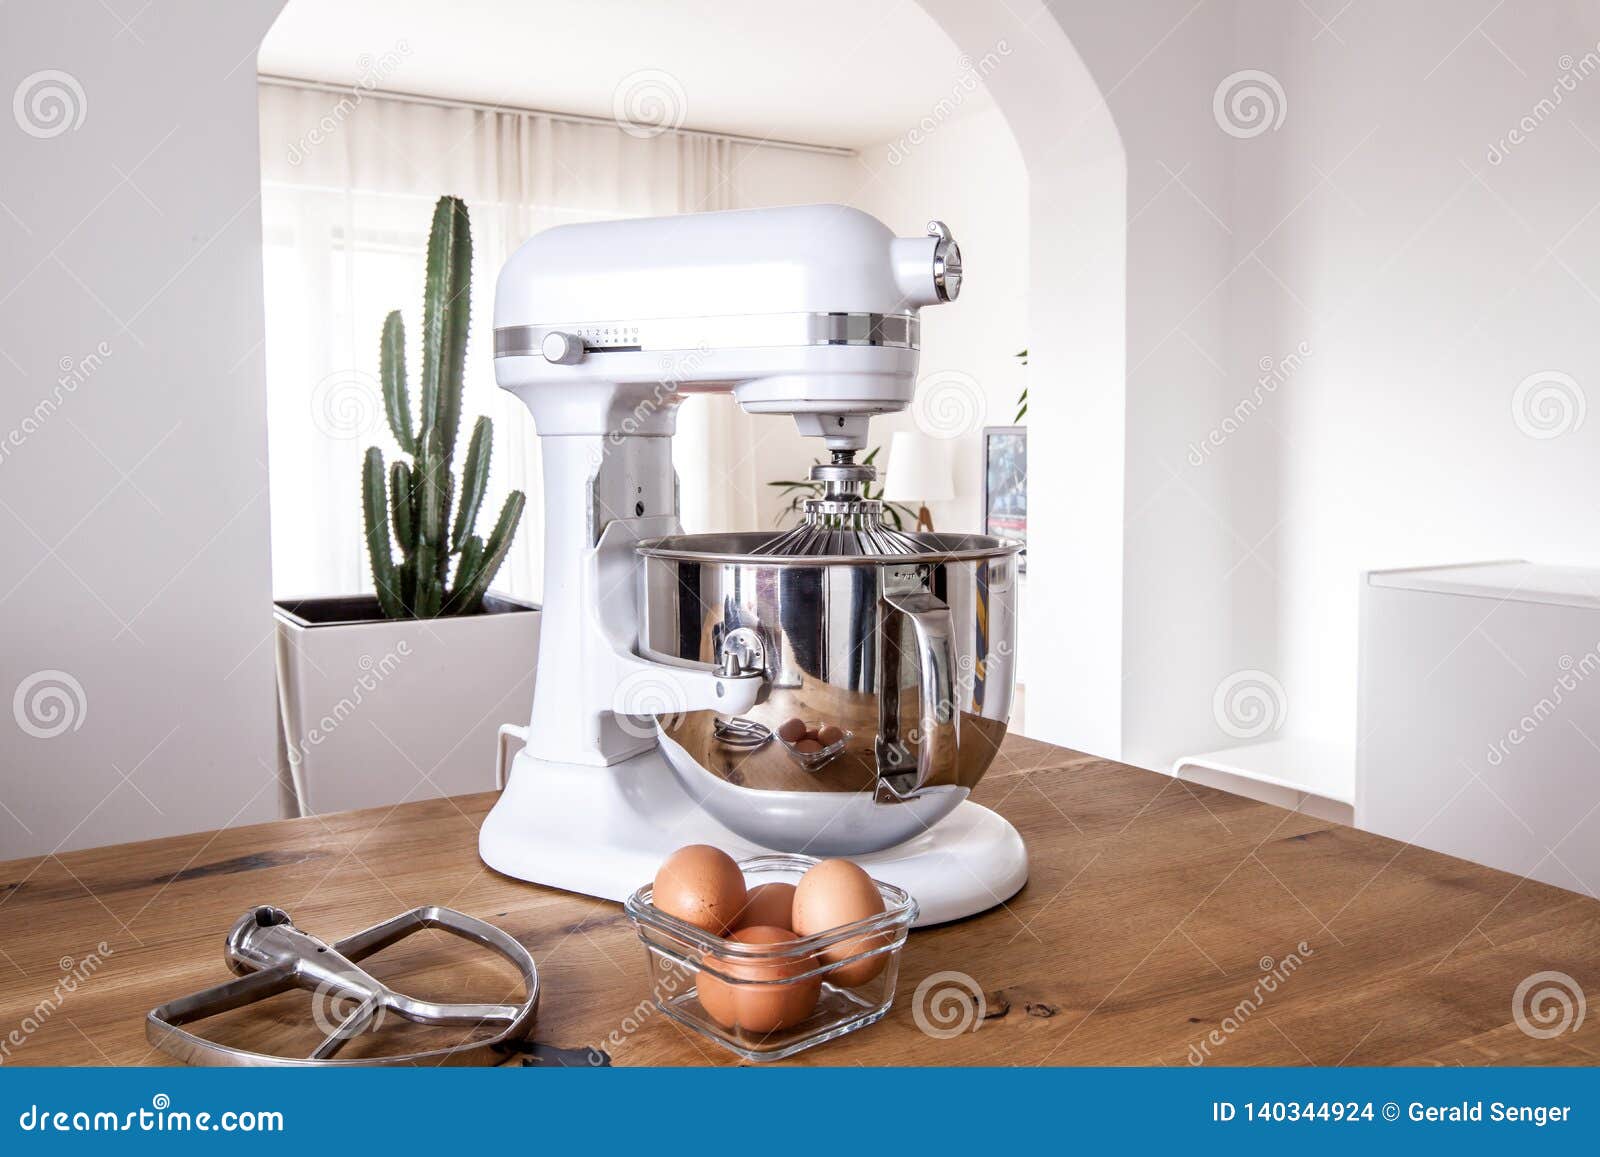 white kitchen machine and stand mixer on a wooden table in a bright  apartment